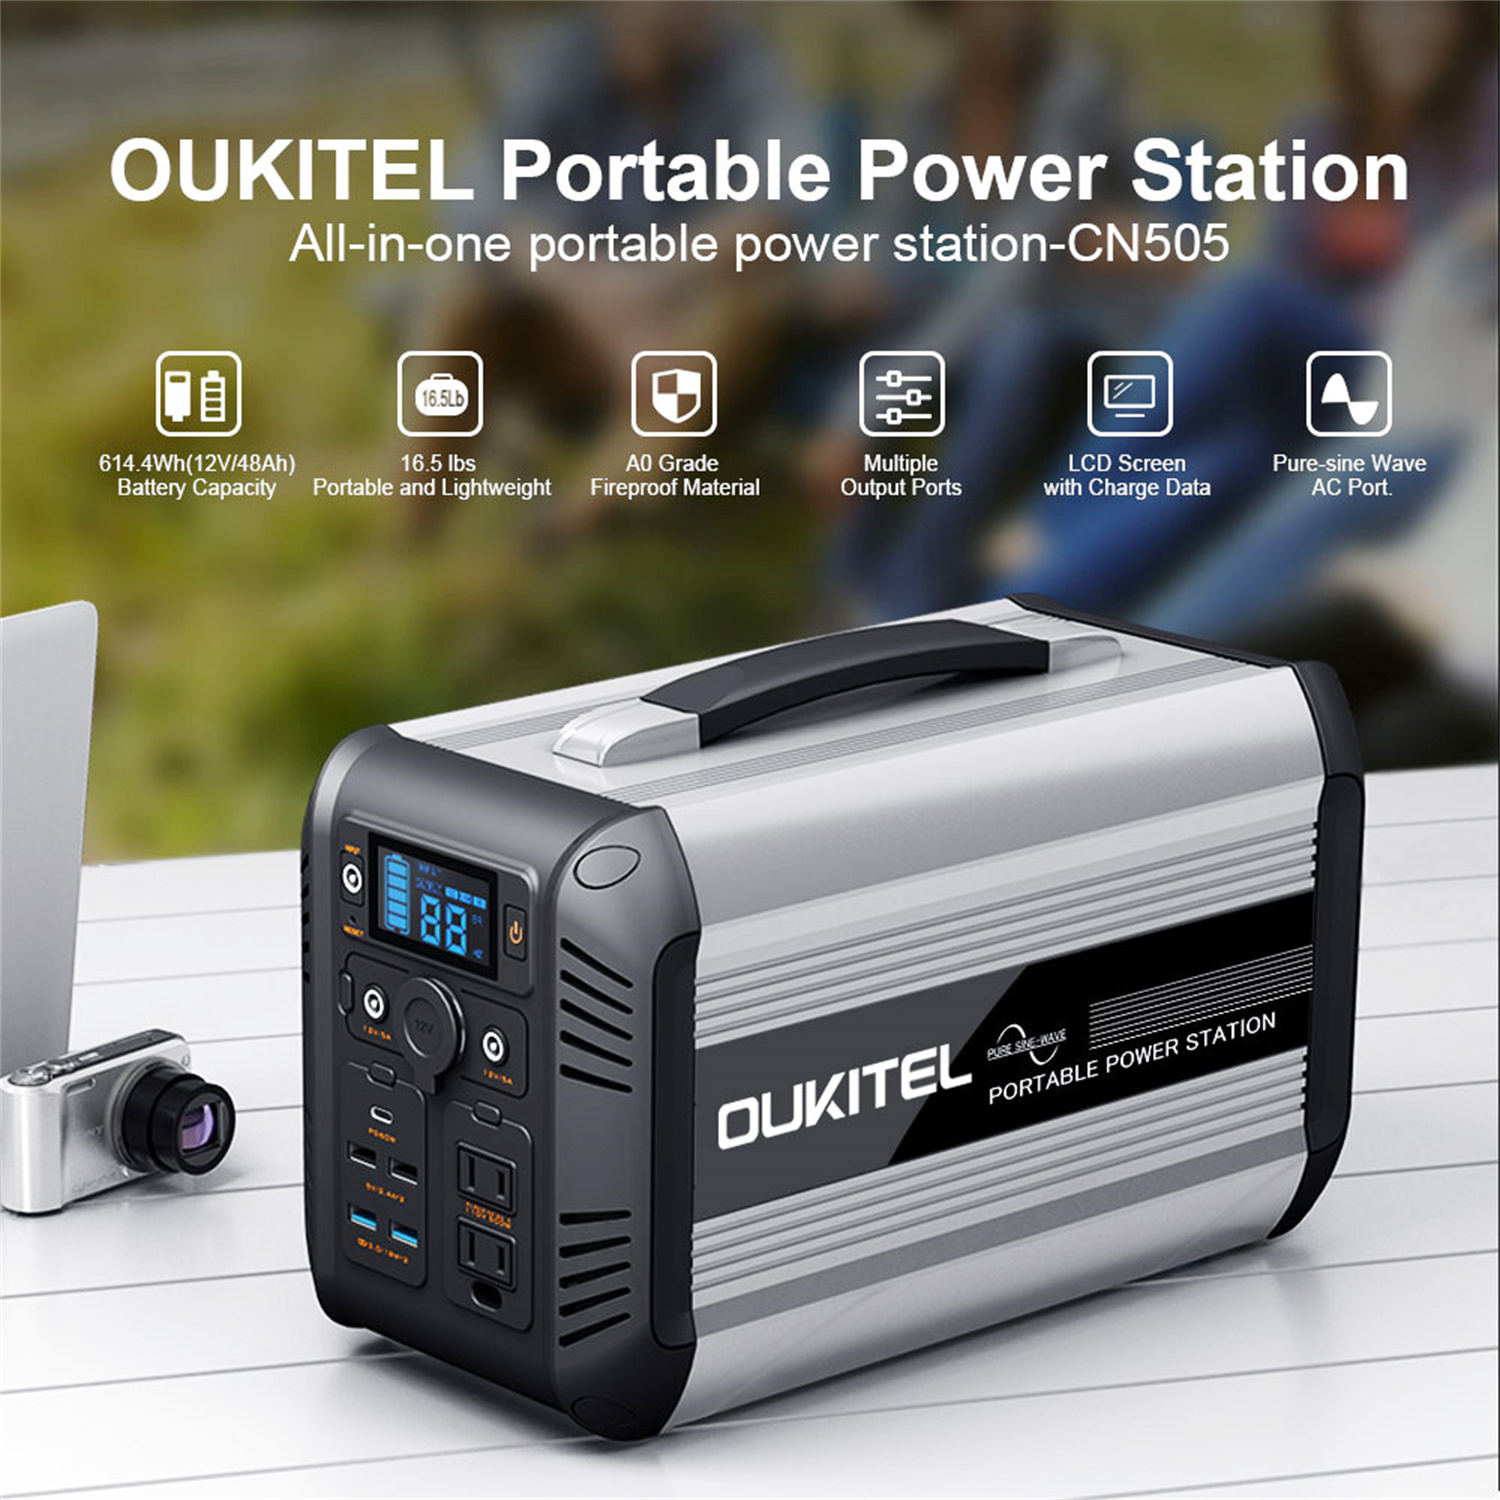 OUKITEL CN505 Portable Power Station 614Wh/500W with Pure Sine Wave and Solar Fast Charging